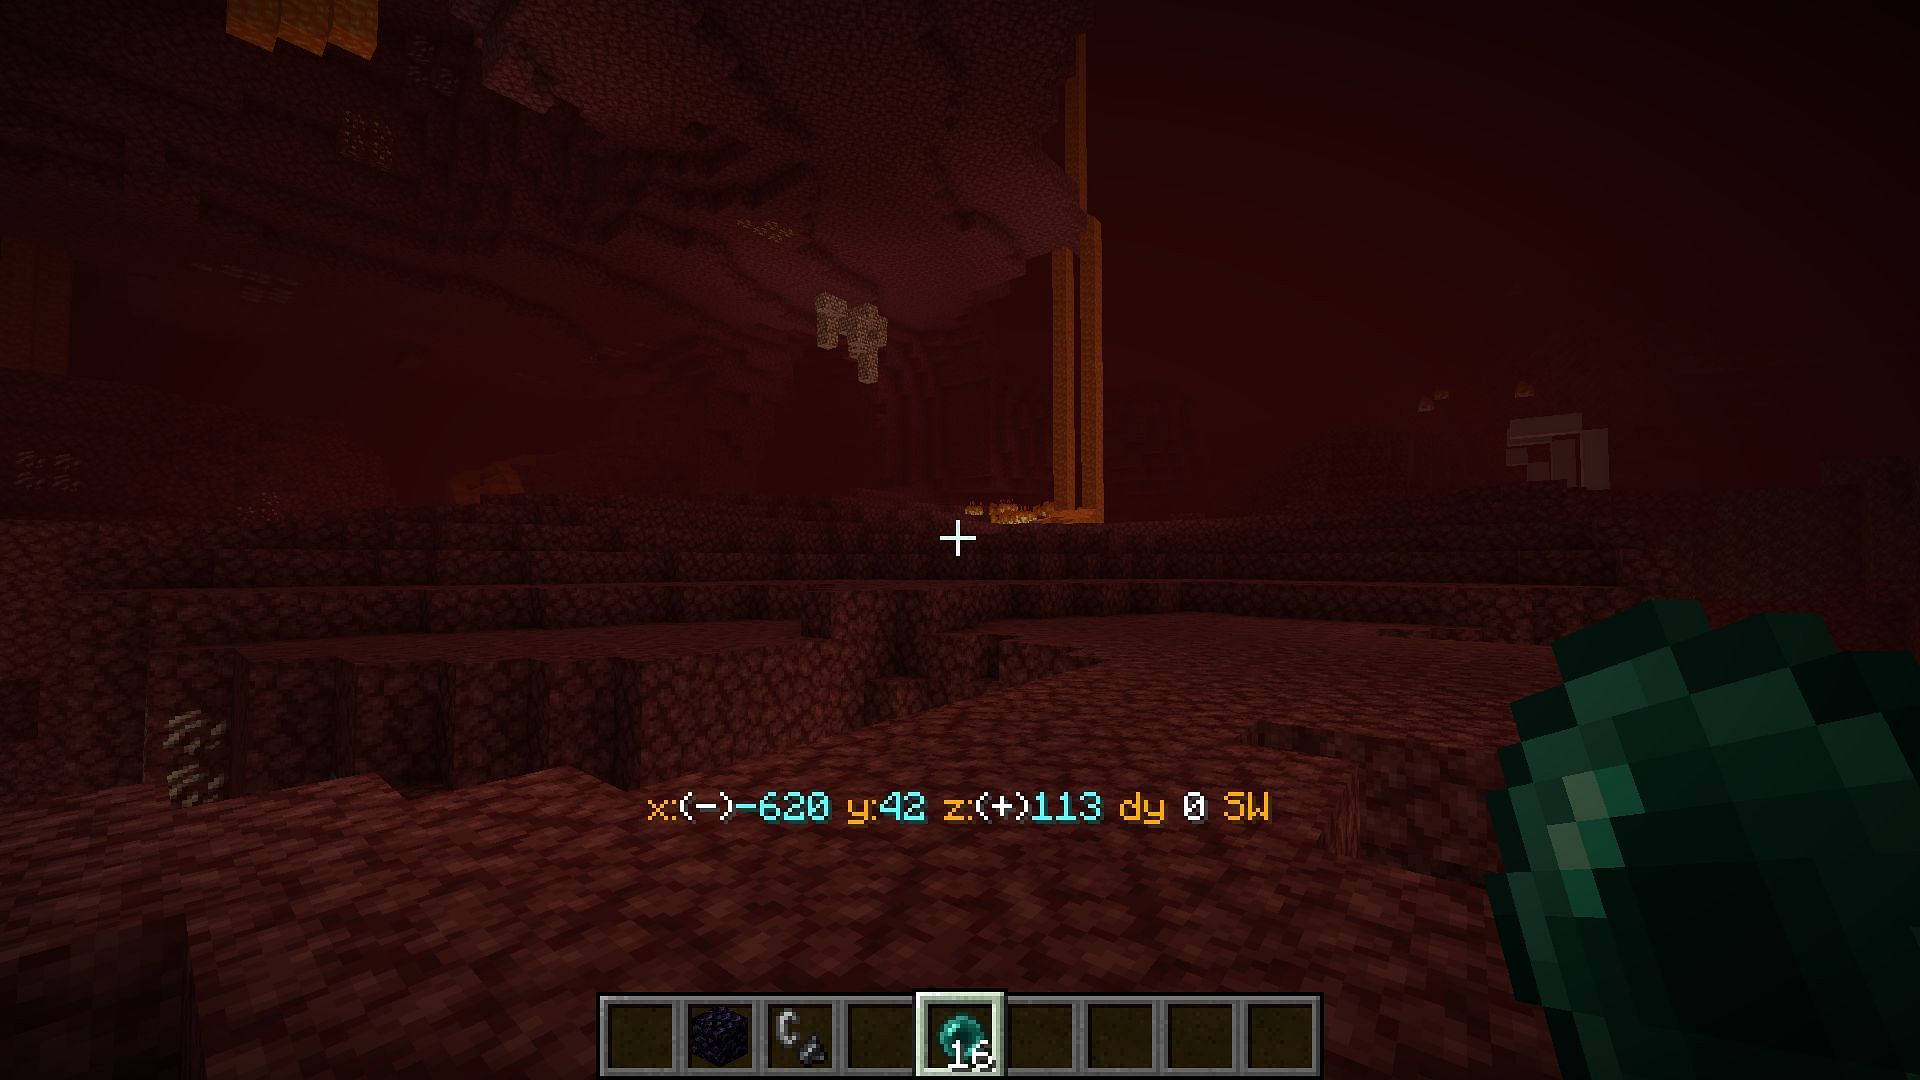 Players must enter all Nether biomes to achieve the Minecraft advancement (Image via Mojang)